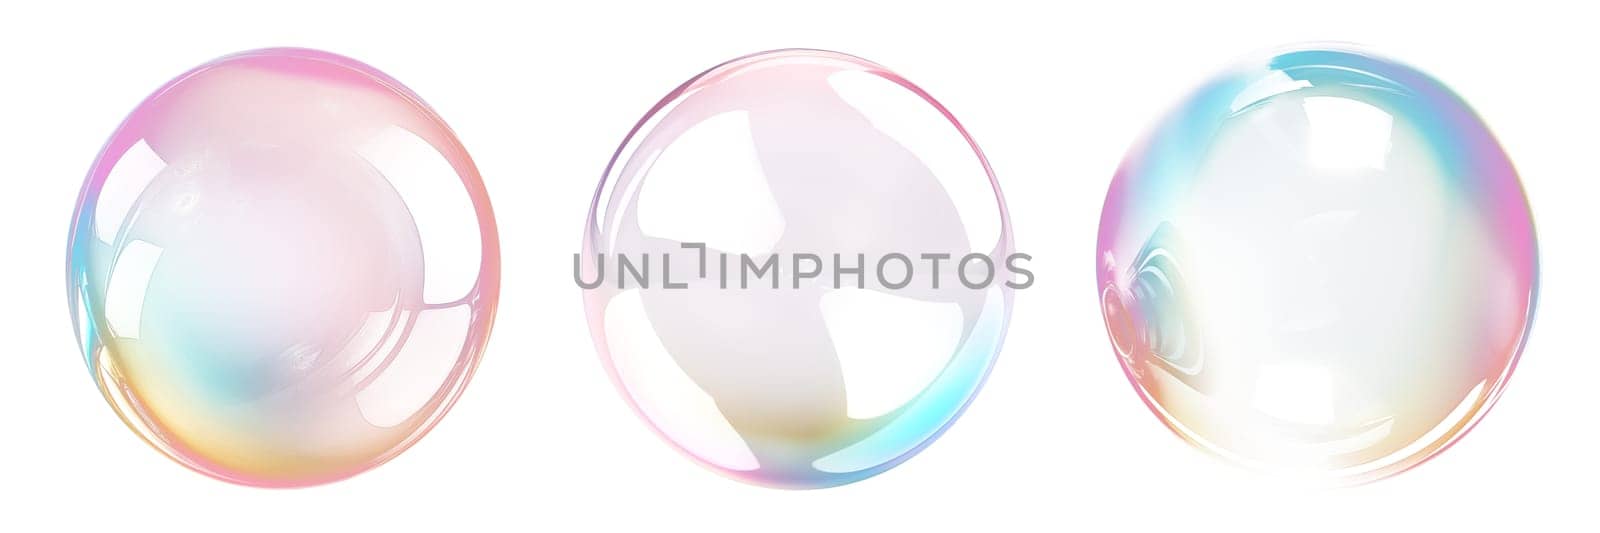 Set of soap bubbles isolated on a transparent background close-up. Flying soap bubbles in PNG format. Attributes of fun. High quality photo